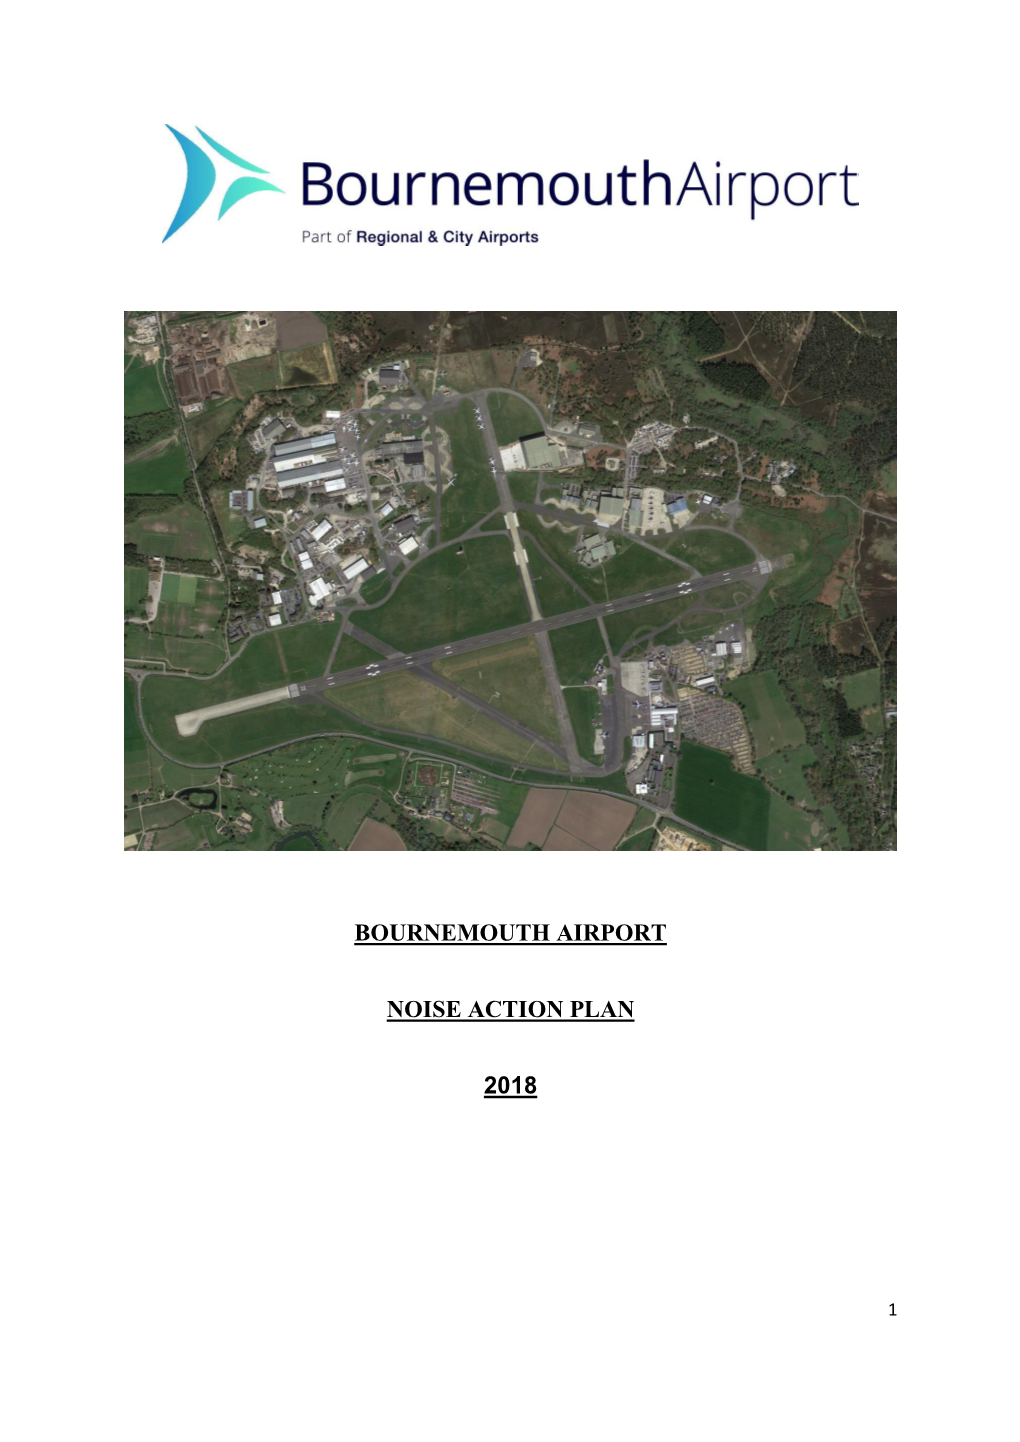 Bournemouth Airport Noise Action Plan Review 2018